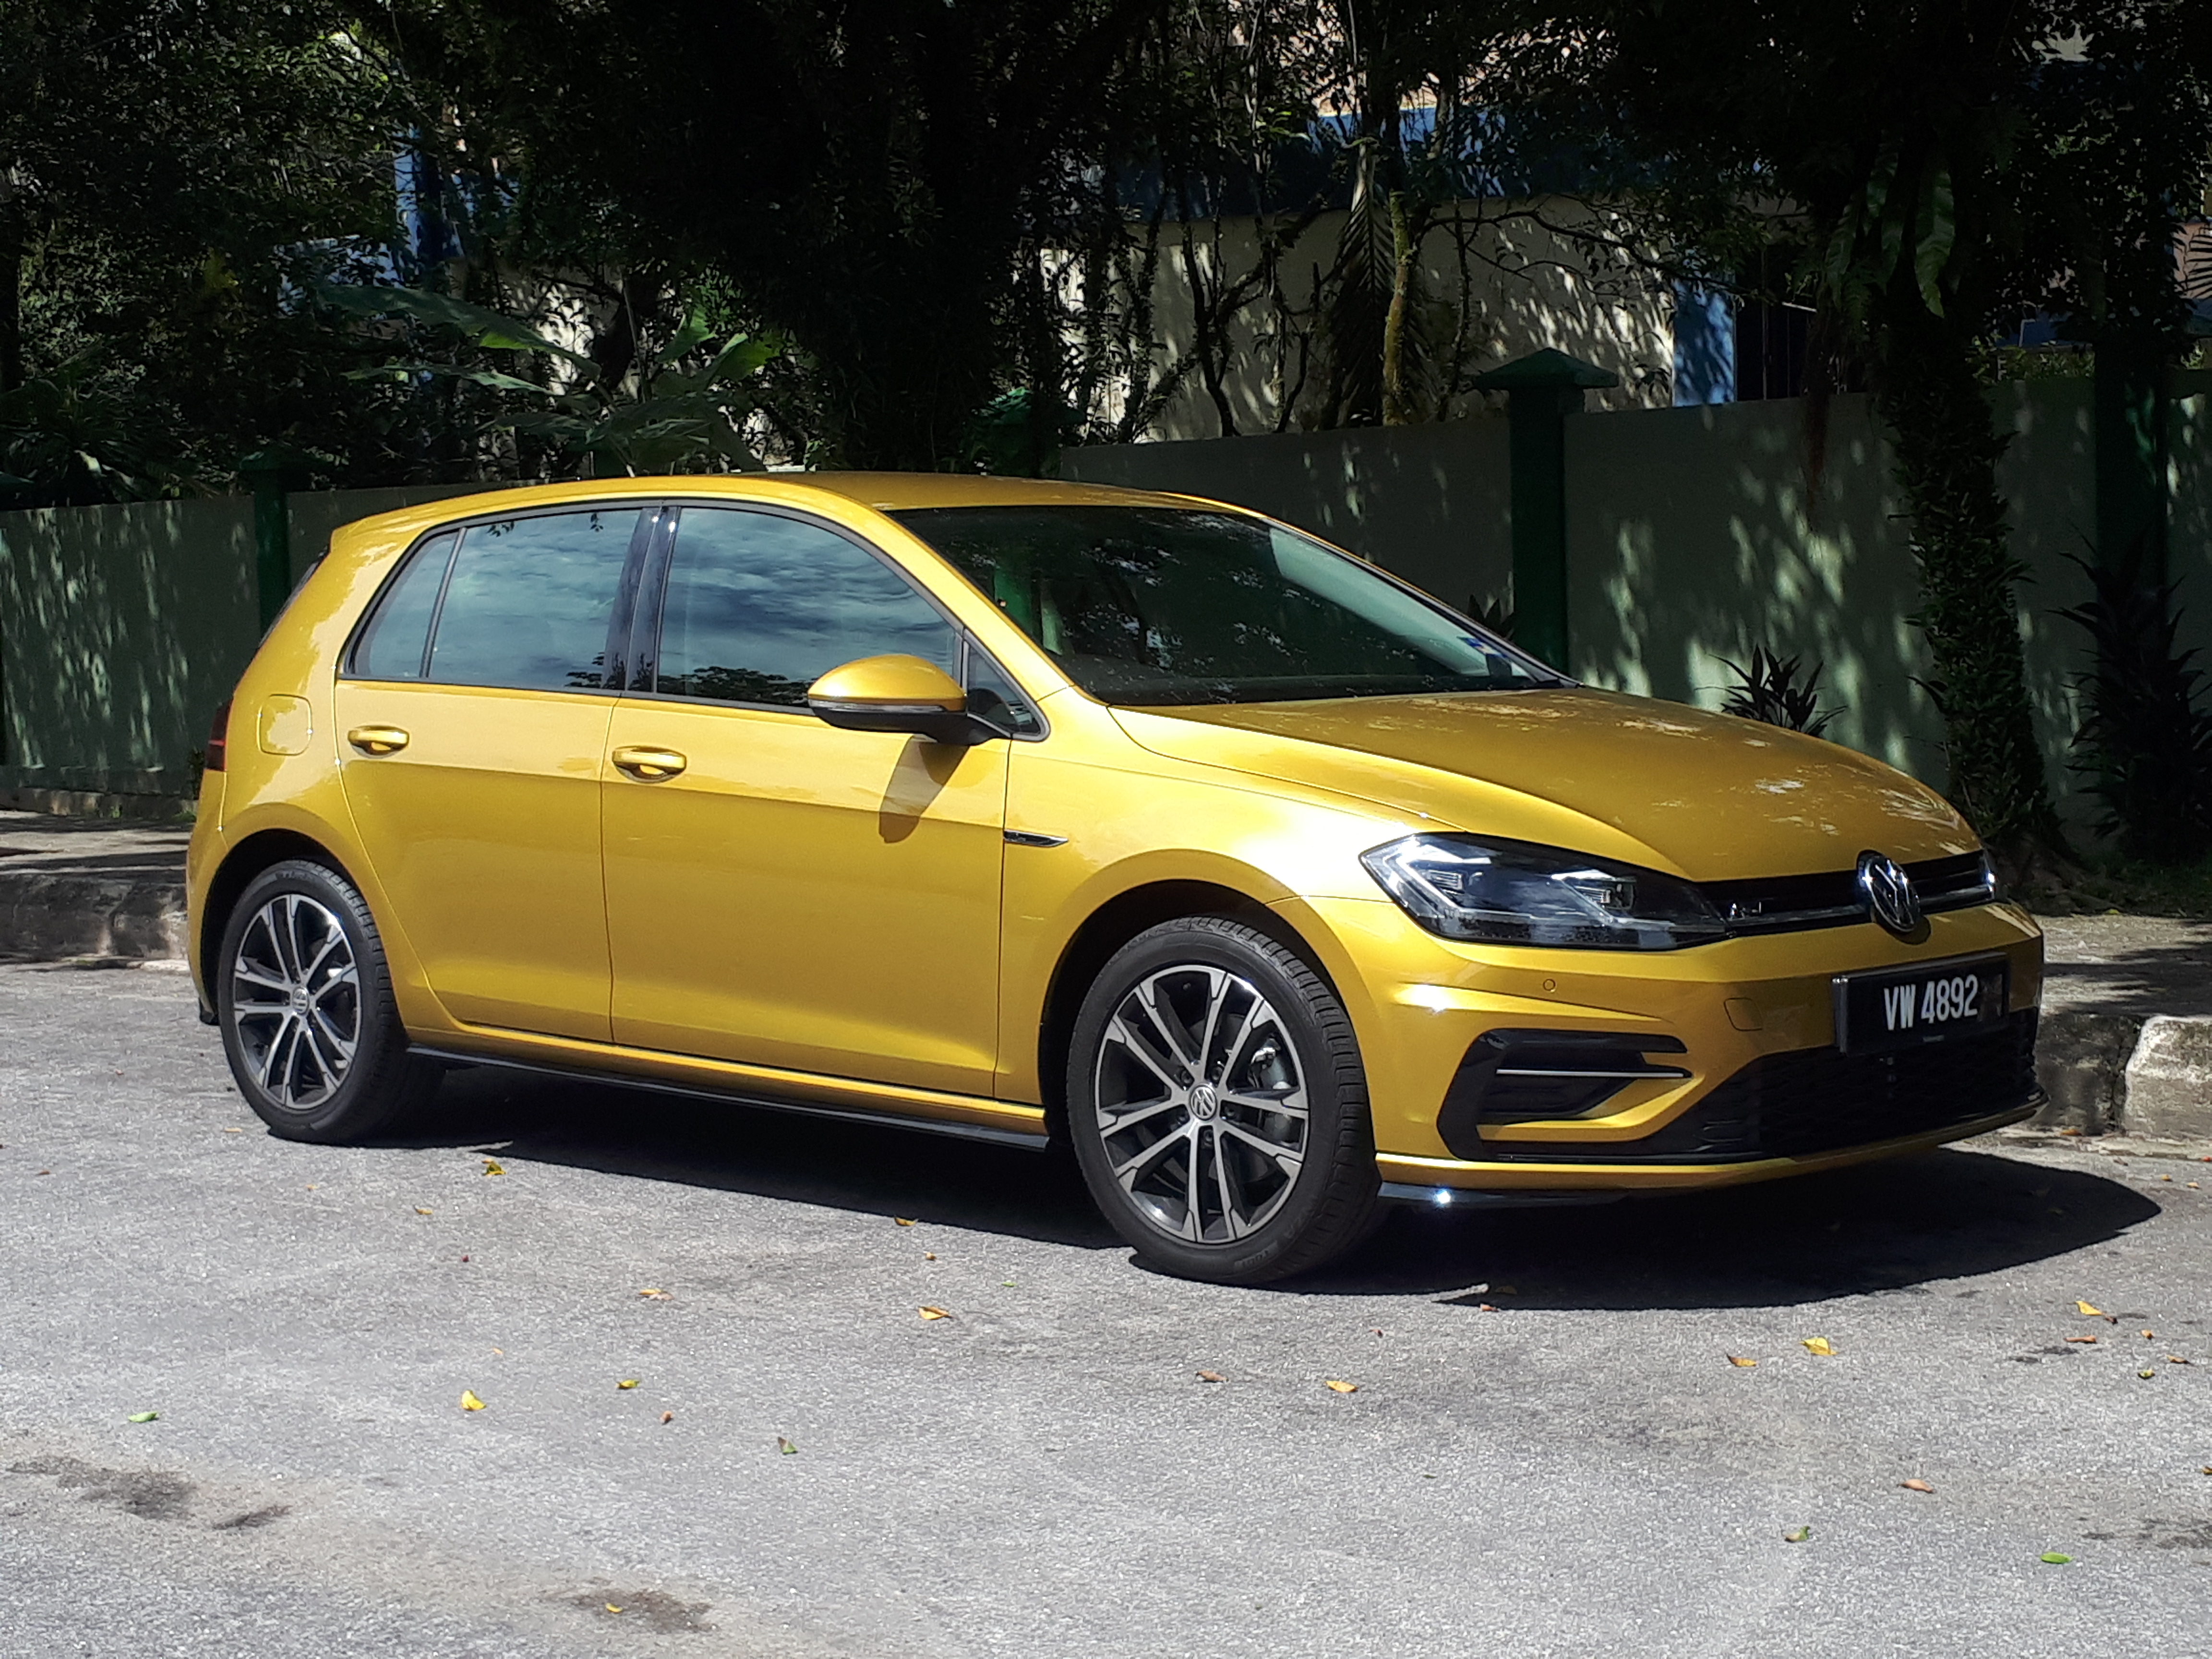 nabootsen Voorlopige Stimulans REVIEWED: VW Golf 1.4 TSI R-Line [+Videos] - News and reviews on Malaysian  cars, motorcycles and automotive lifestyle